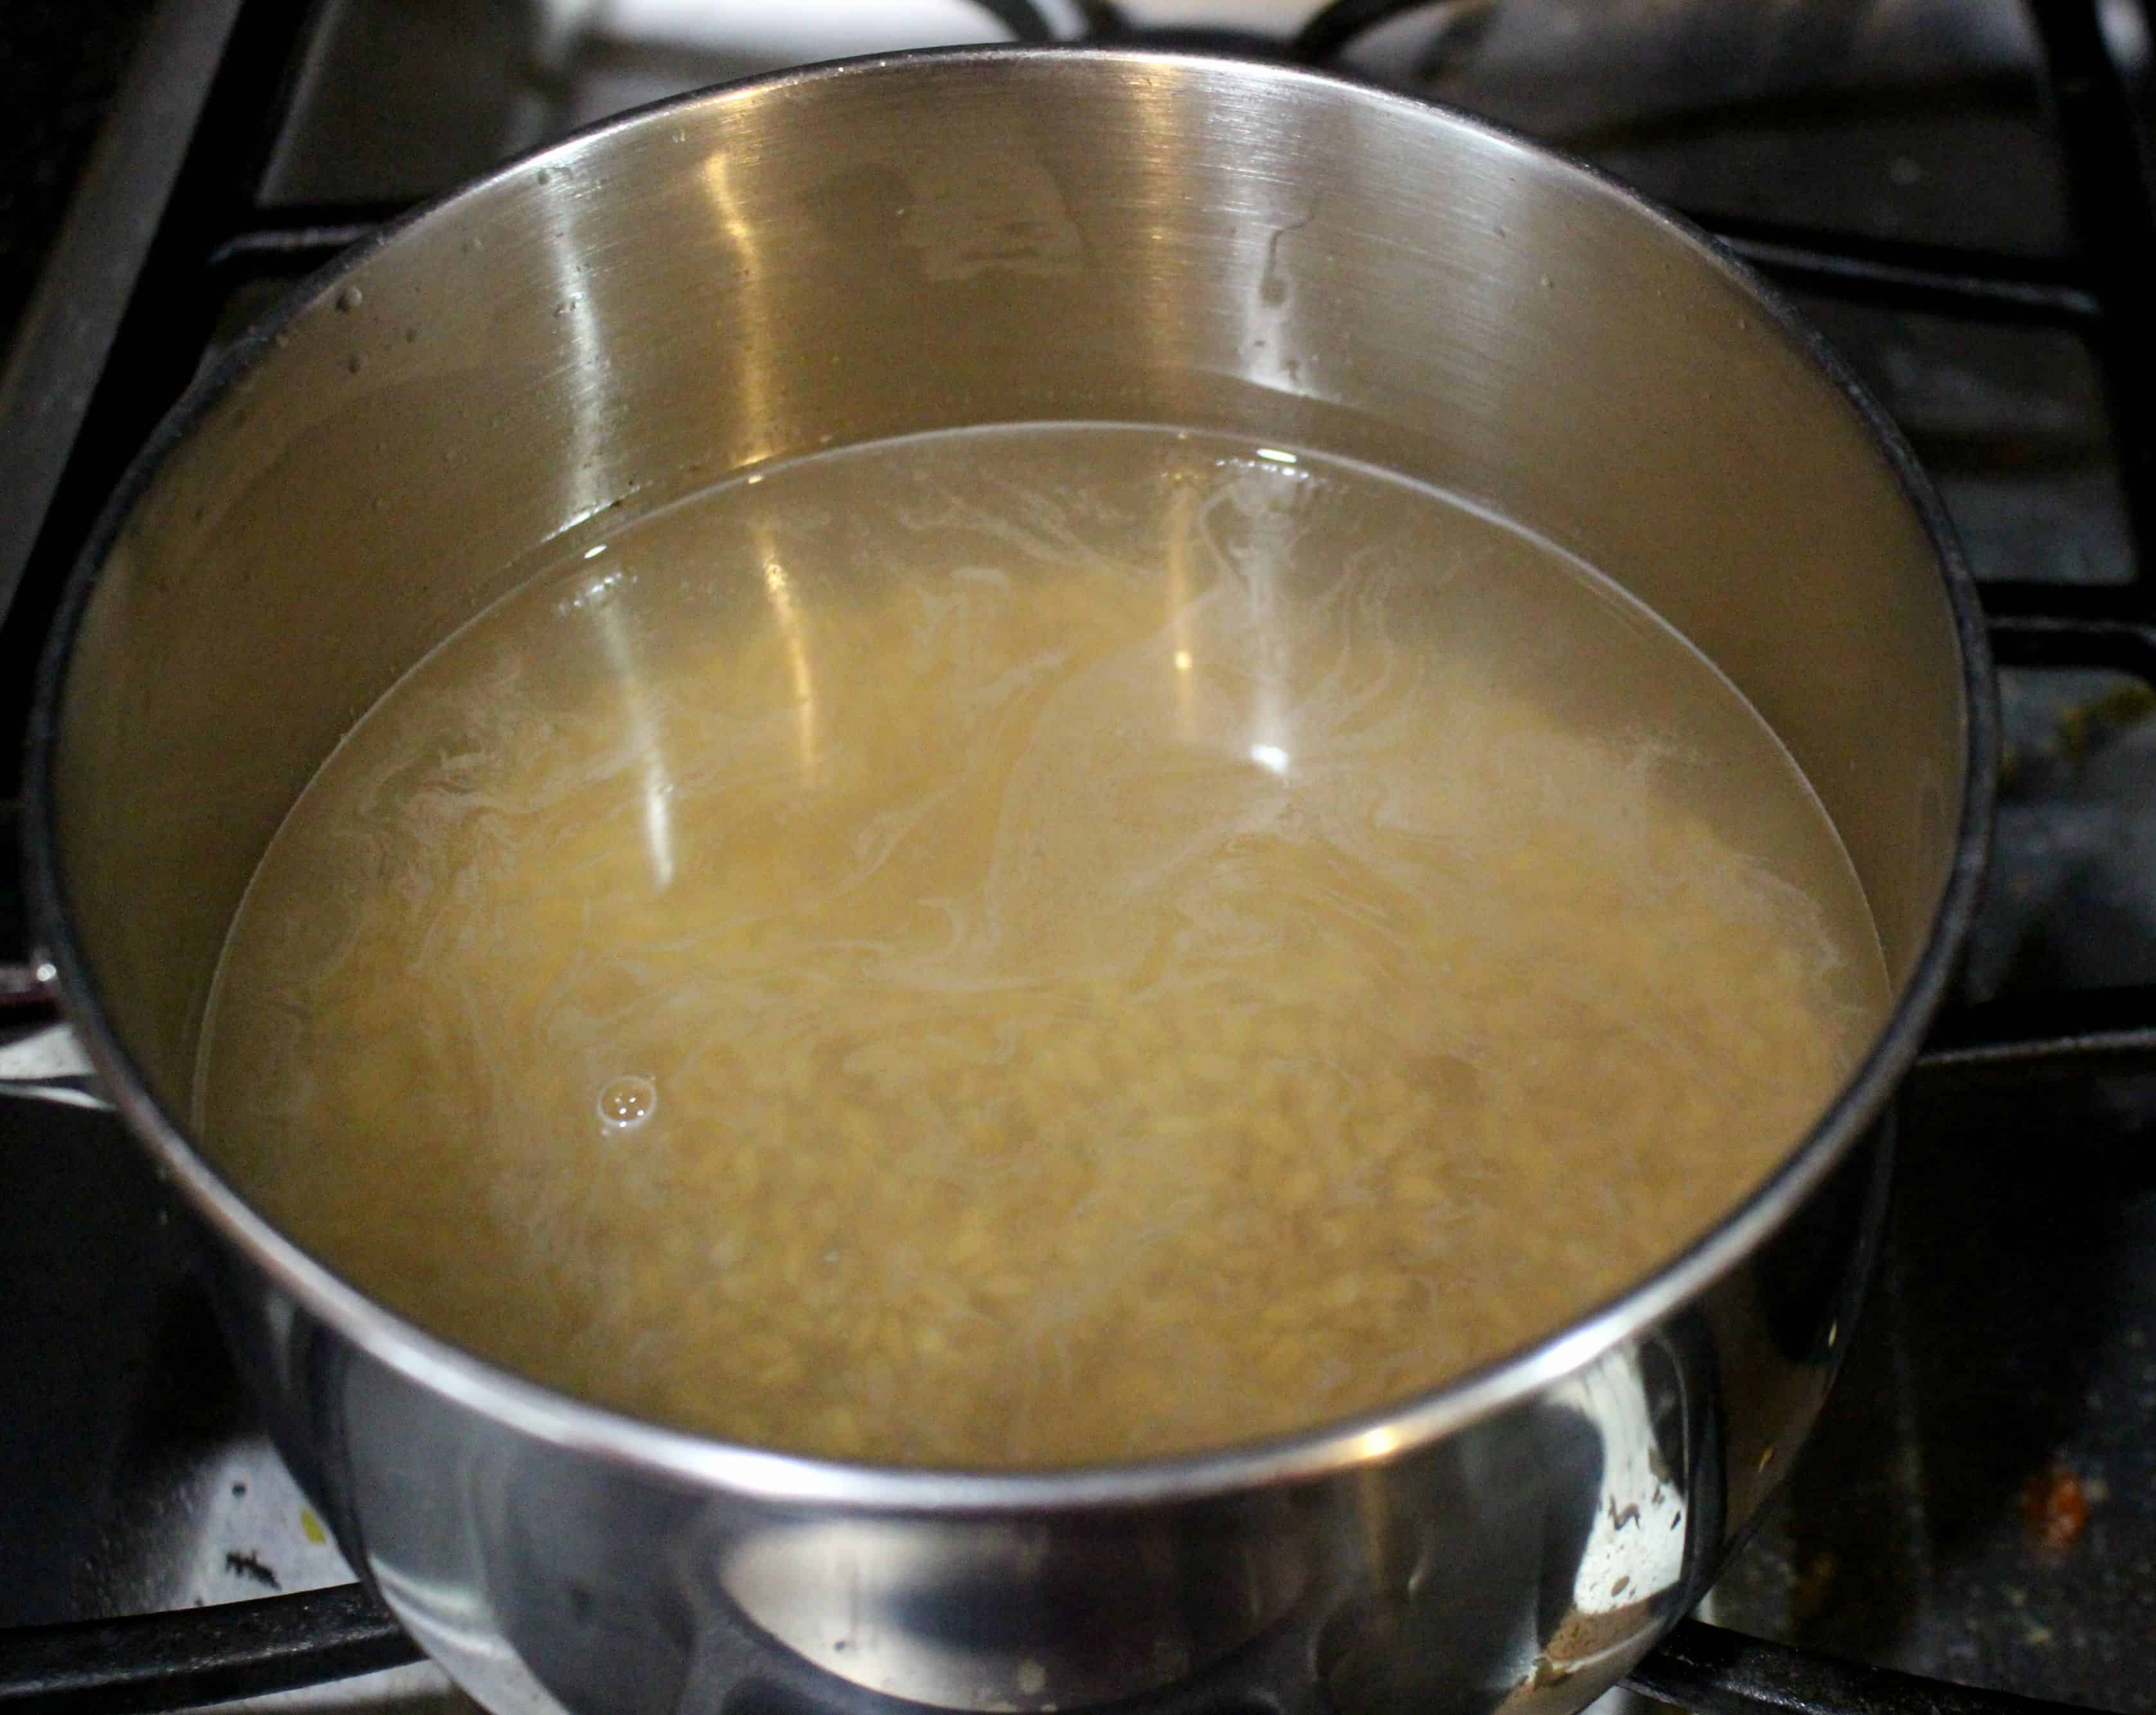 cooking farro in a pot of water